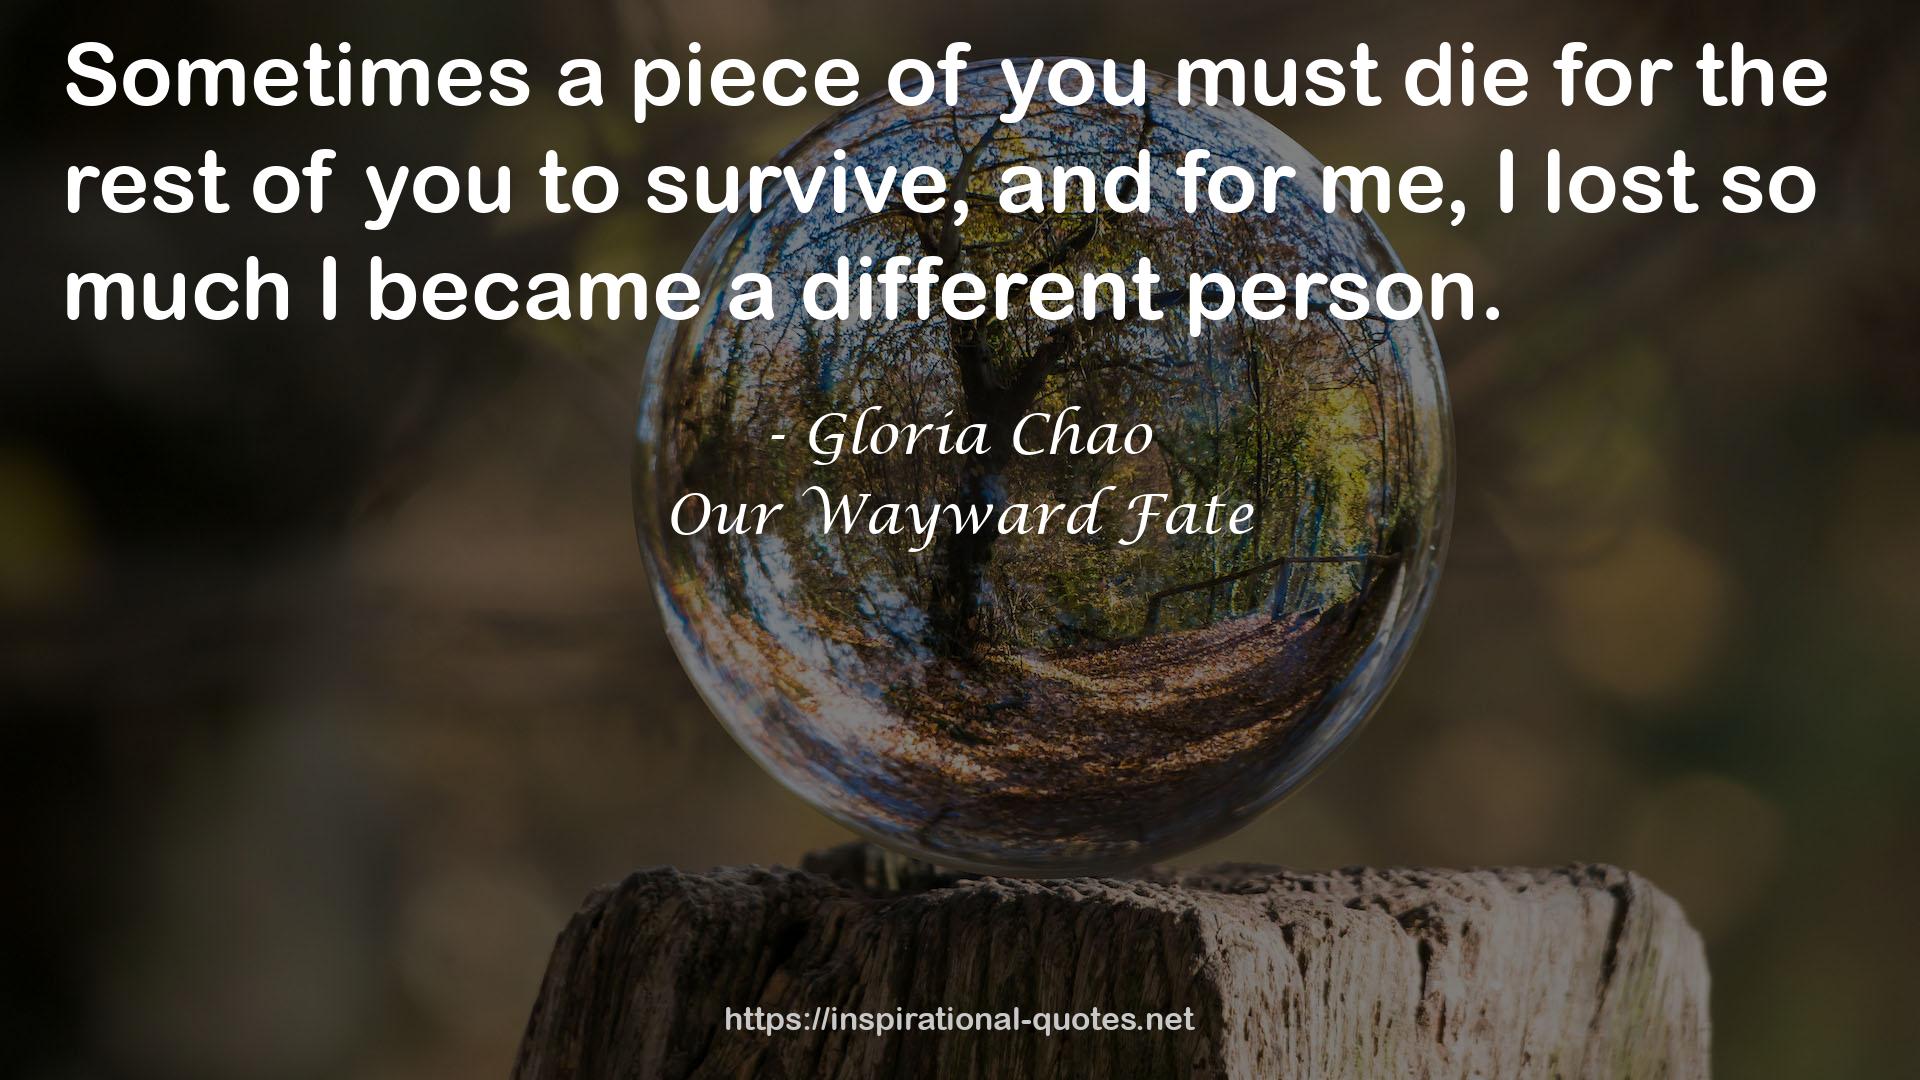 Our Wayward Fate QUOTES